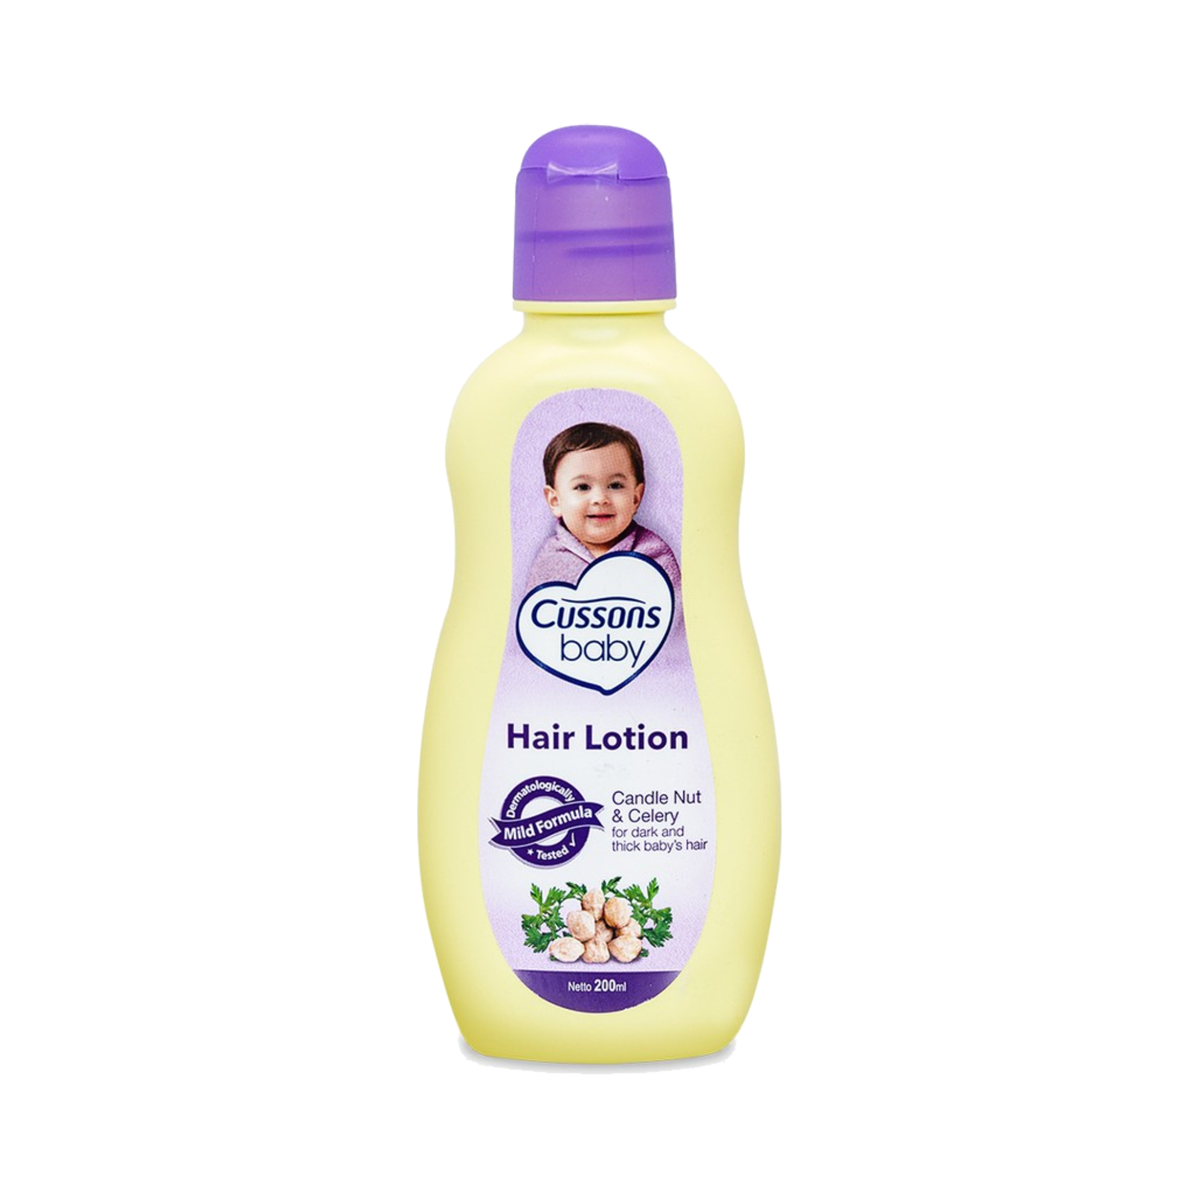 Cussons Baby Hair Lotion Candle Nut & Celery 200ml